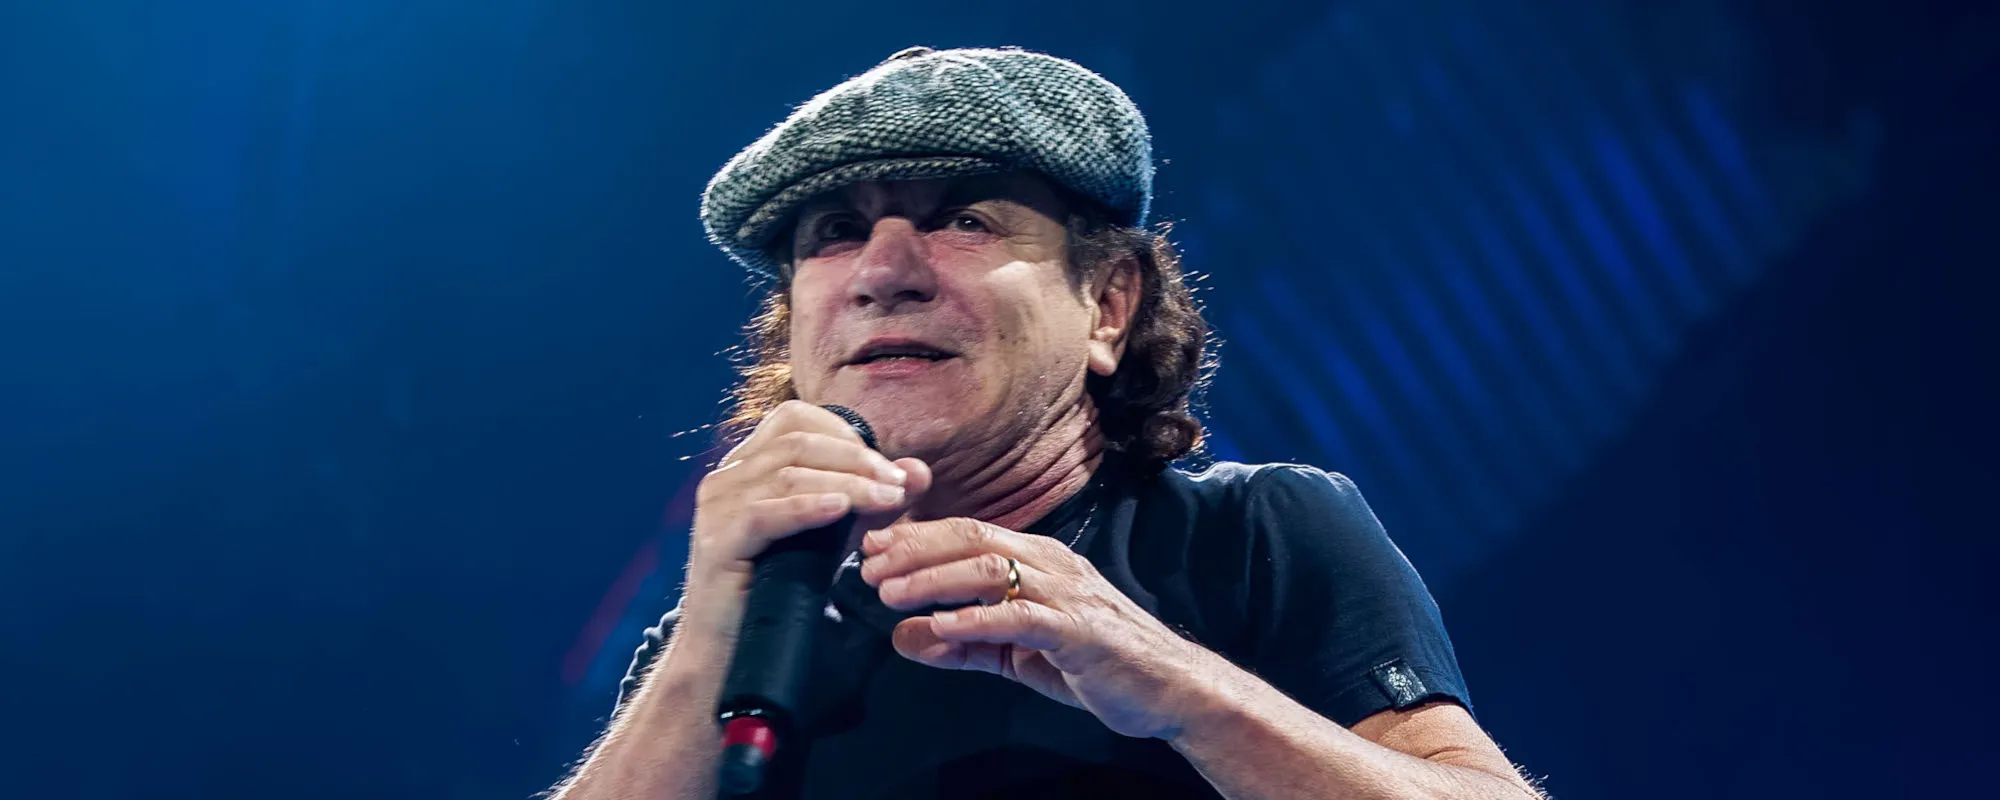 AC/DC’s Brian Johnson Clears Up That “Awkward” Mic Grab at Taylor Hawkins Tribute Show